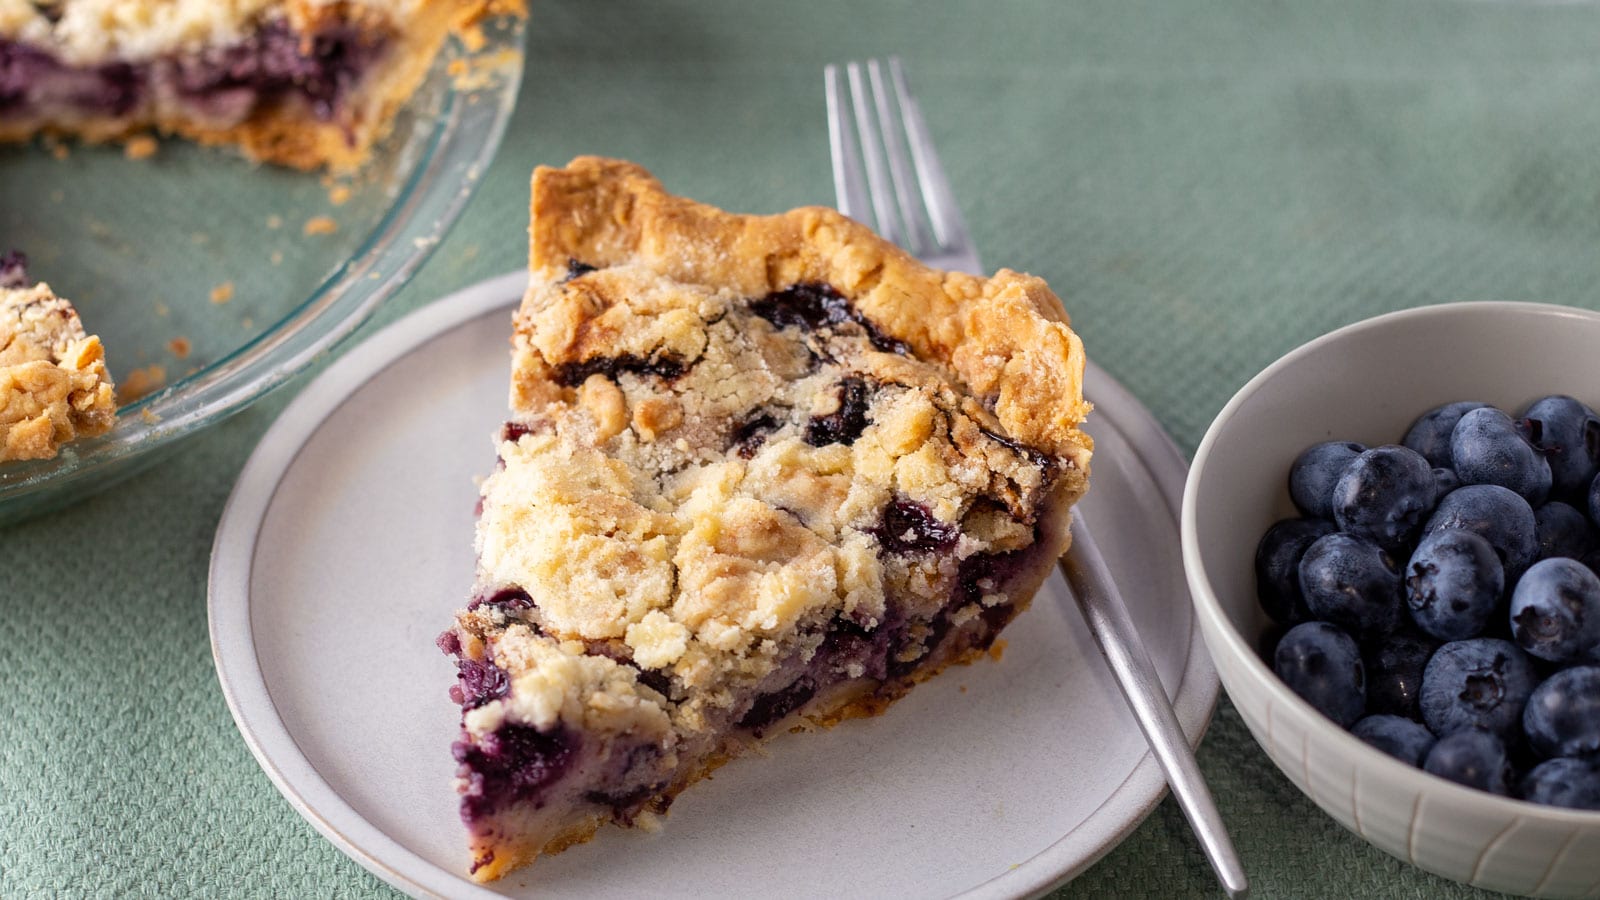 Wide image of sour cream blueberry pie.